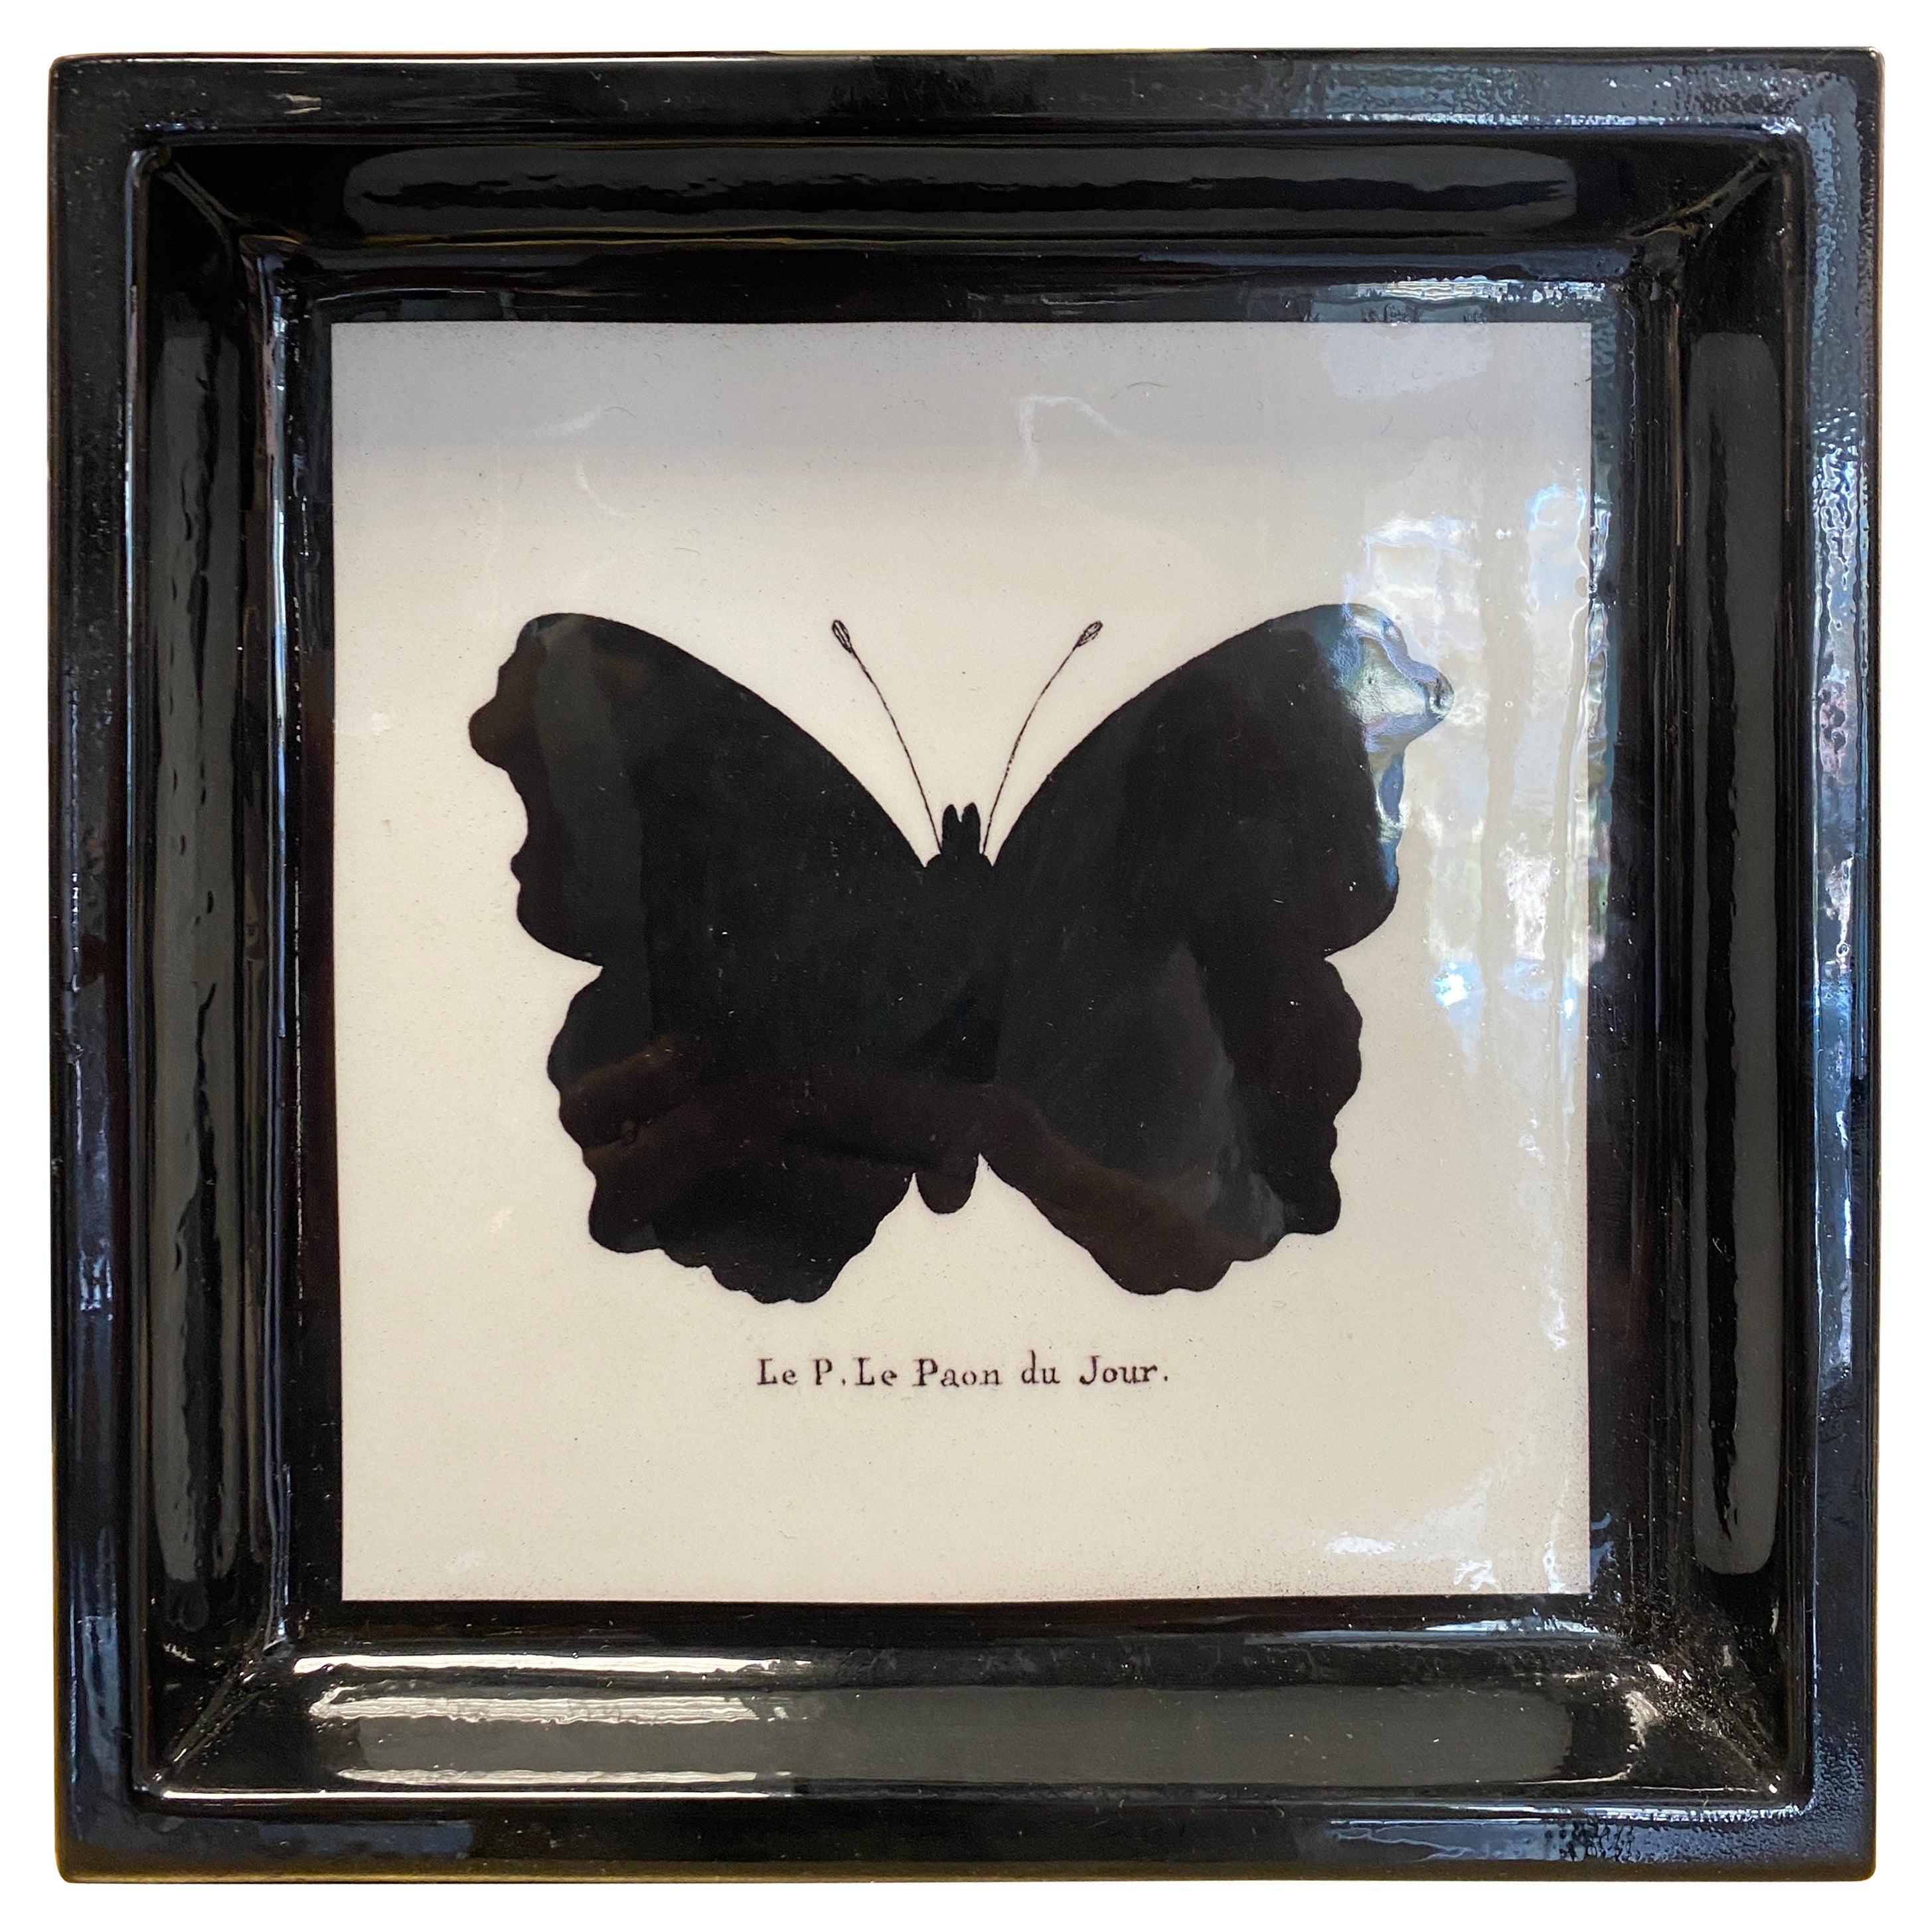 Italian Contemporary "Black and Wild" Collection Butterfly Resin Pocket Tray